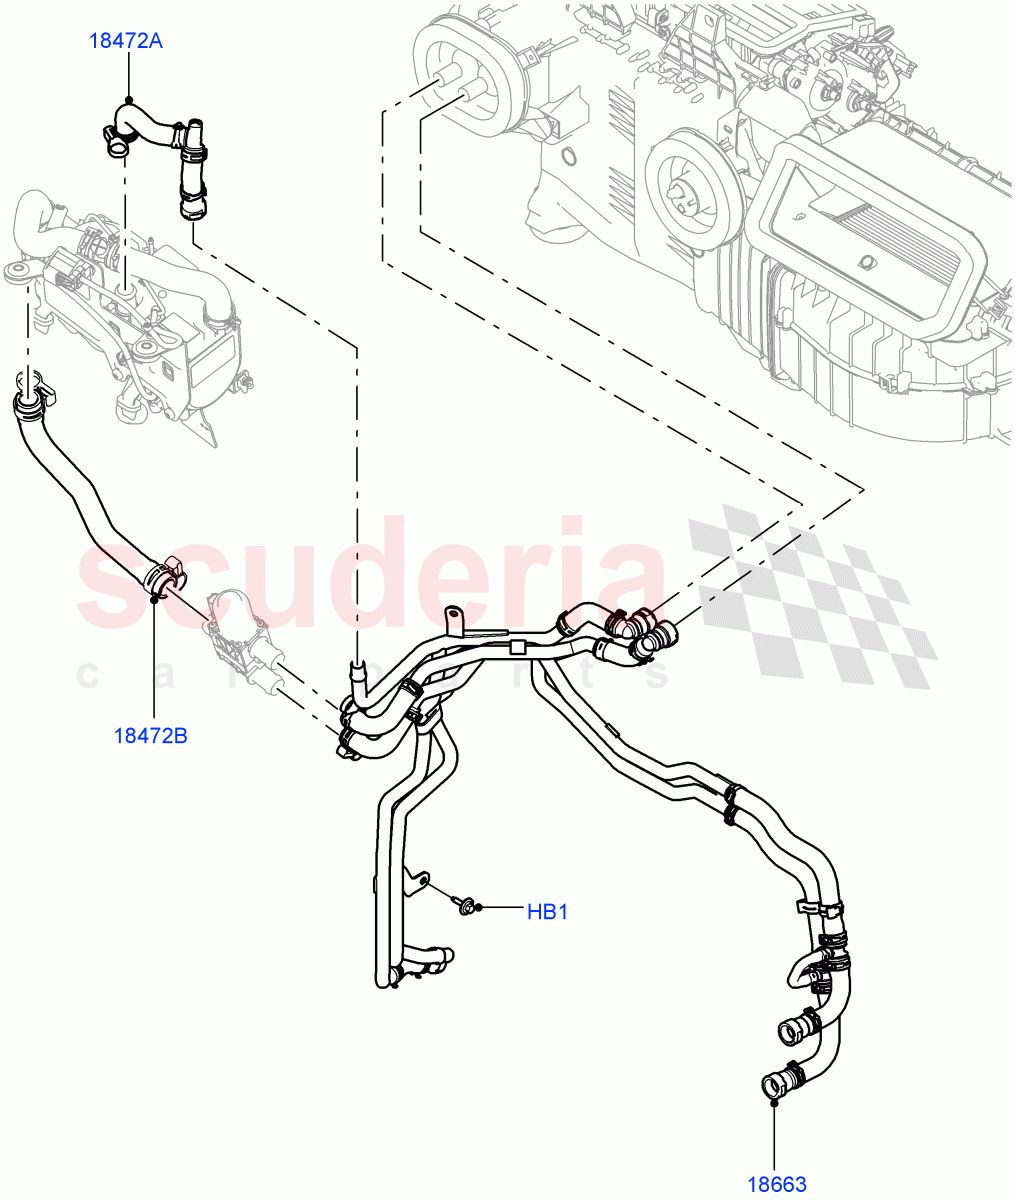 Heater Hoses(Front)(2.0L I4 DSL HIGH DOHC AJ200,With Fuel Fired Heater,With Air Conditioning - Front/Rear,Park Heating With Remote Control)((V)FROMHA000001,(V)TOHA999999) of Land Rover Land Rover Range Rover Sport (2014+) [3.0 I6 Turbo Diesel AJ20D6]